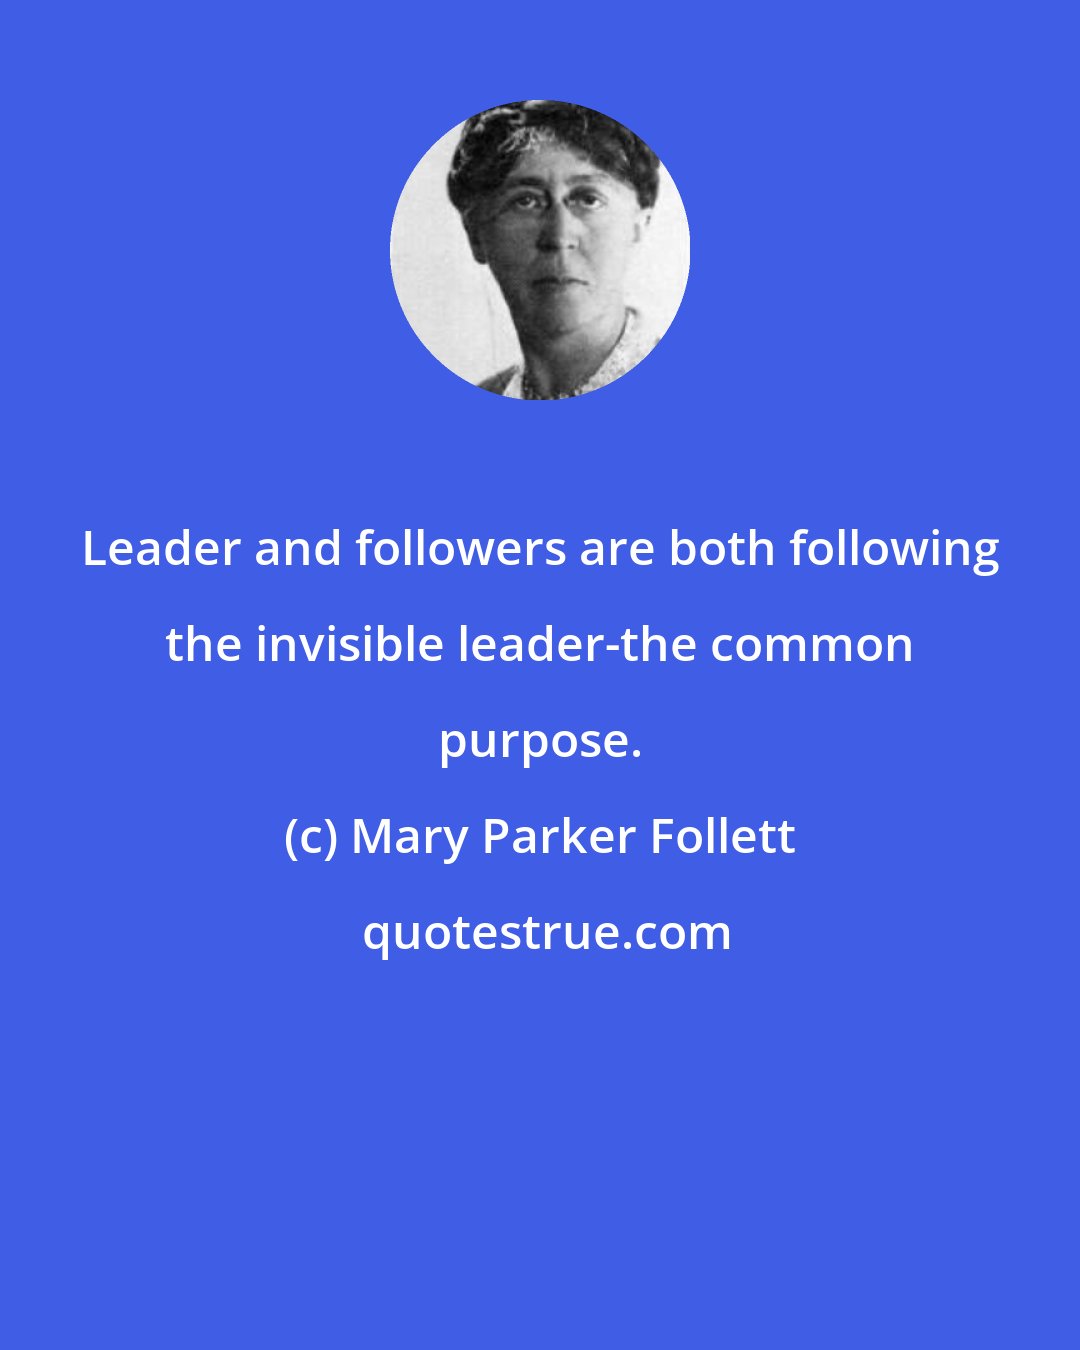 Mary Parker Follett: Leader and followers are both following the invisible leader-the common purpose.